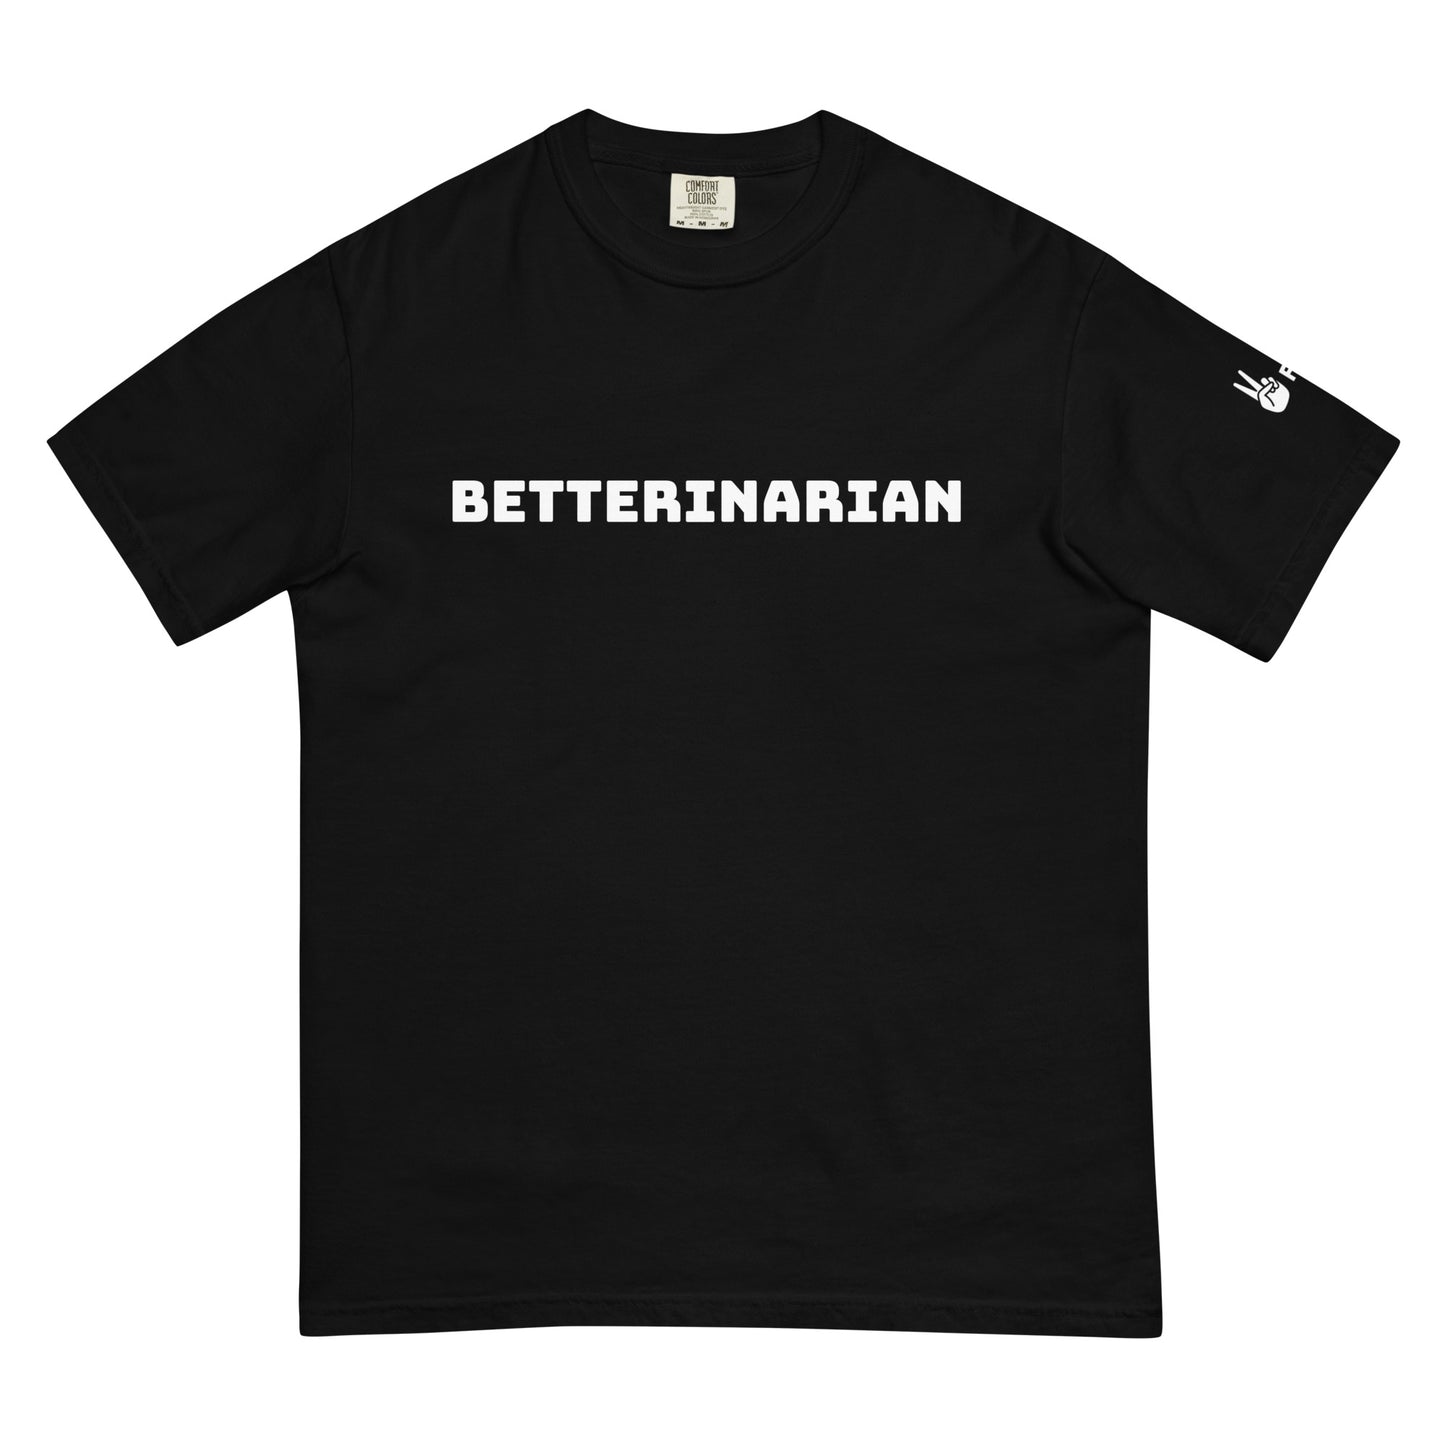 Better-inarian